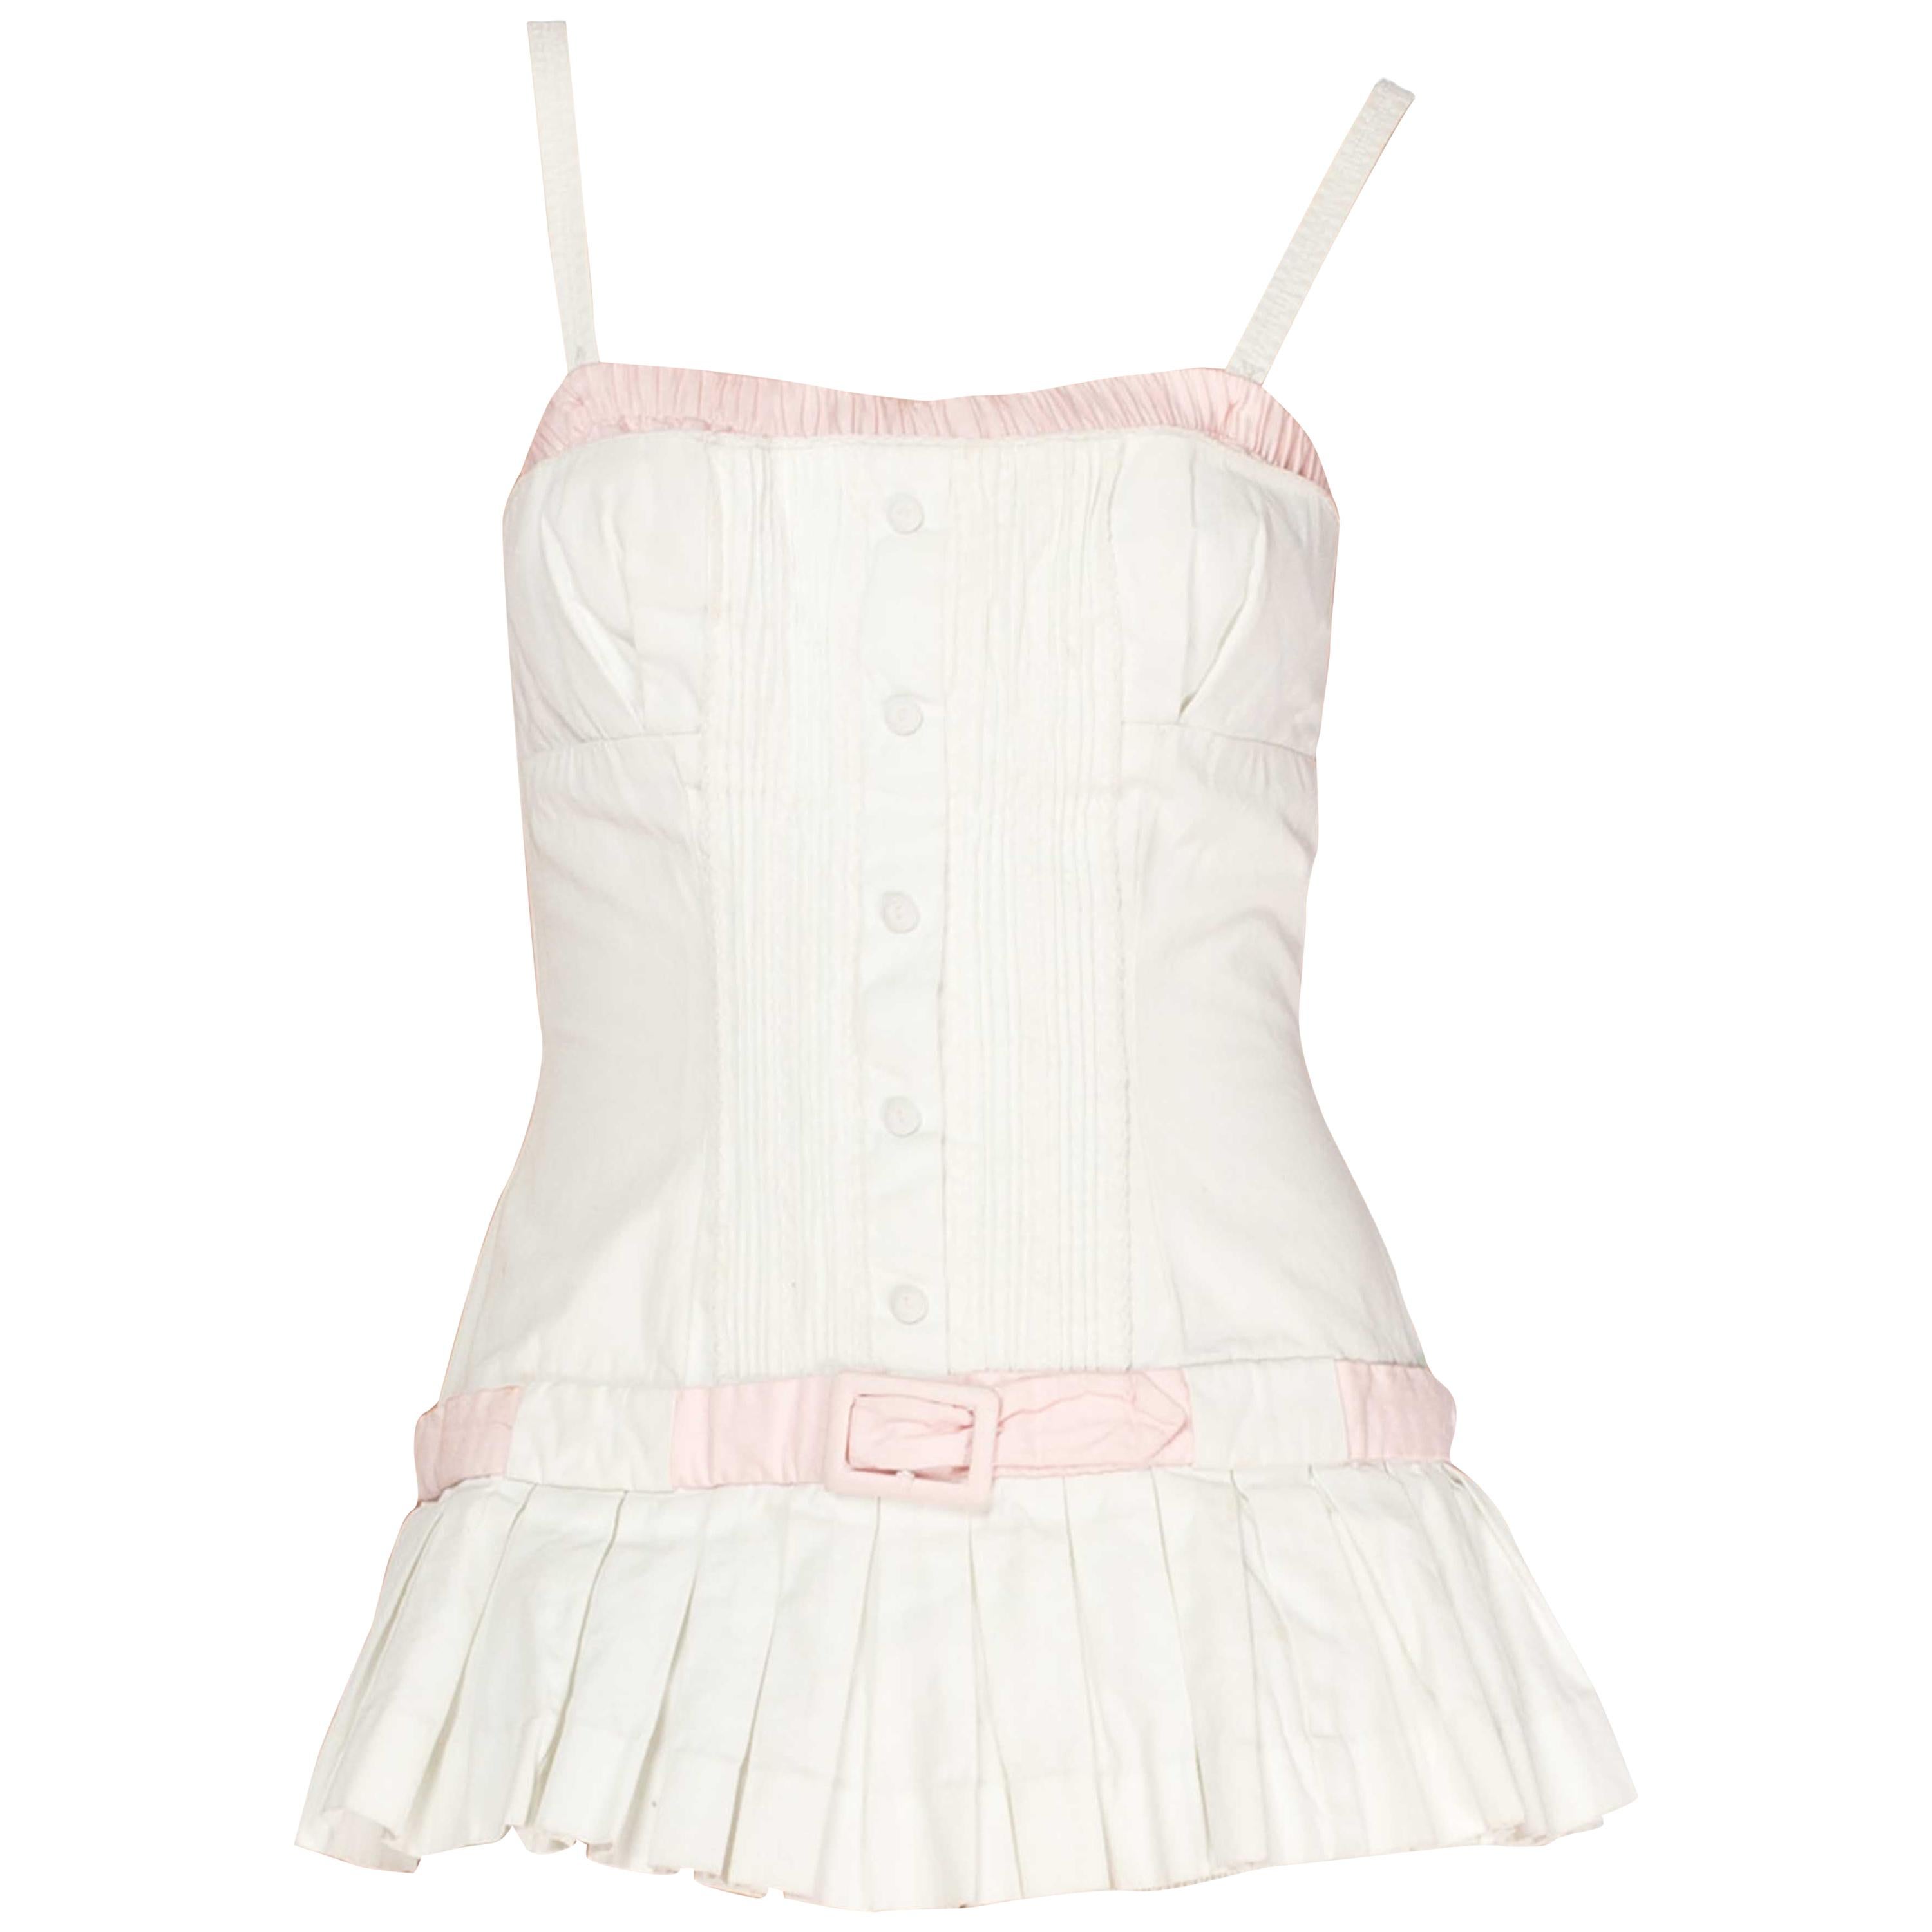 1950S White & Pink Cotton Boned Swimsuit Sunsuit With Skirt